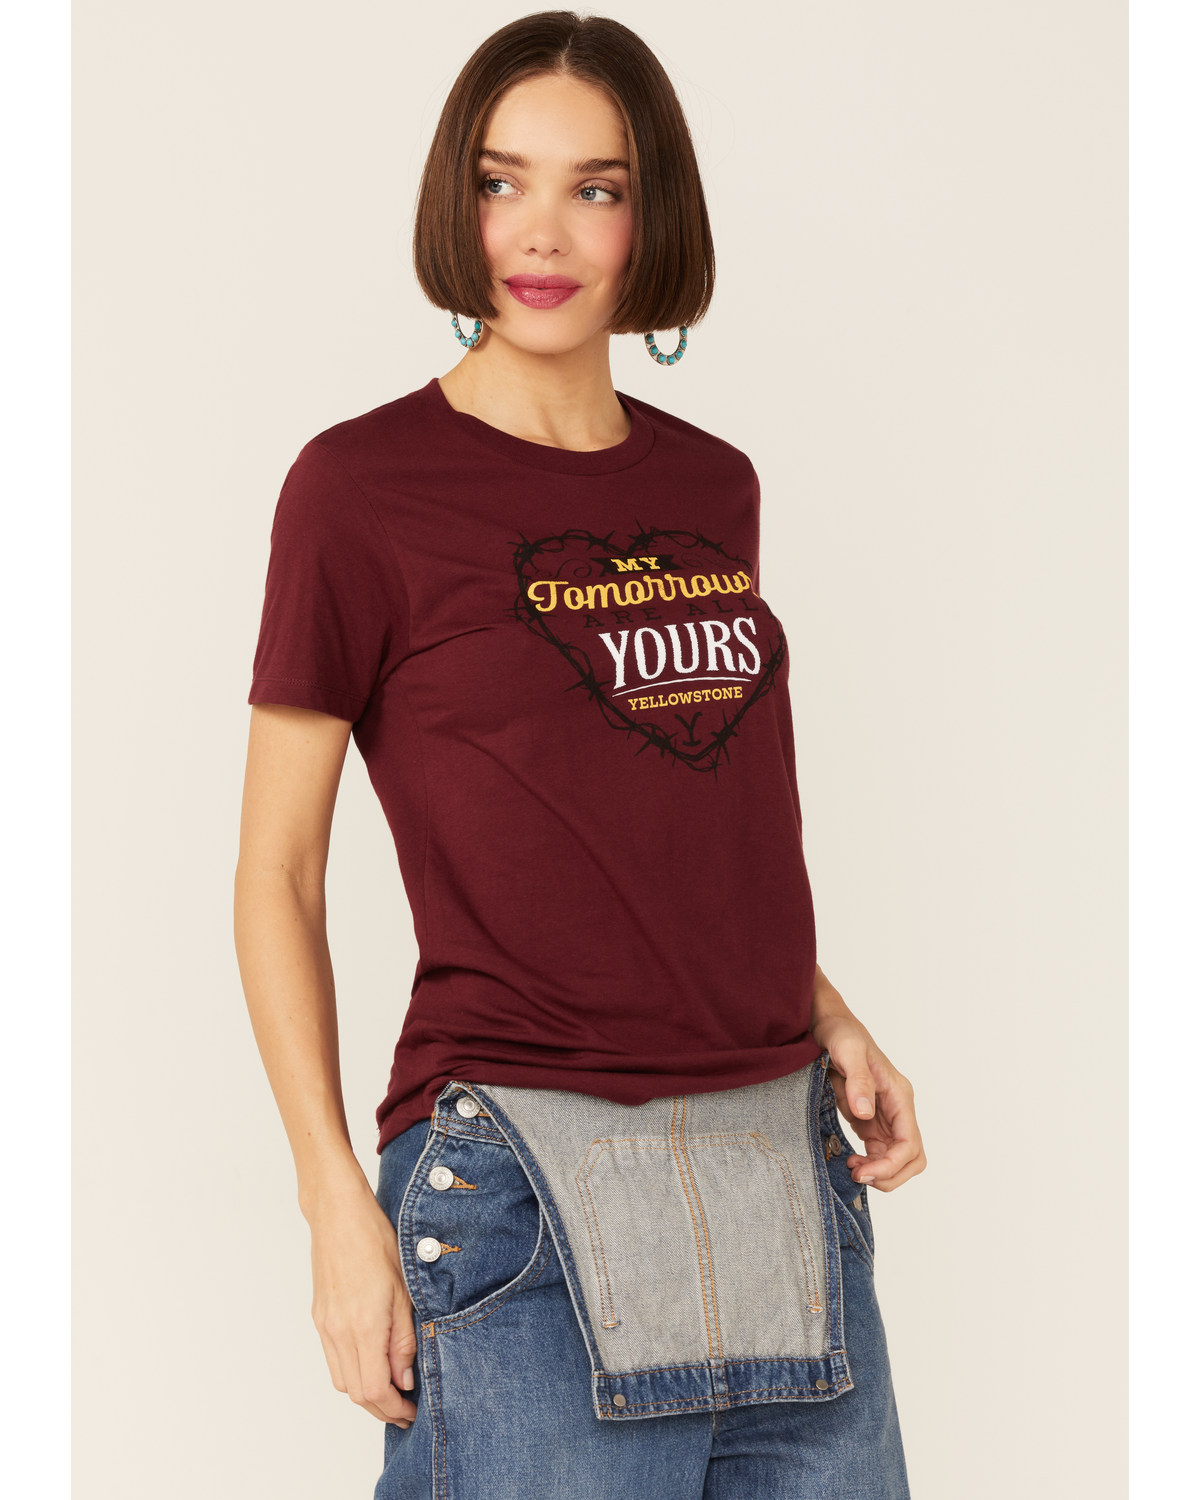 Paramount Network's Yellowstone My Tomorrows Are All Yours Graphic Tee